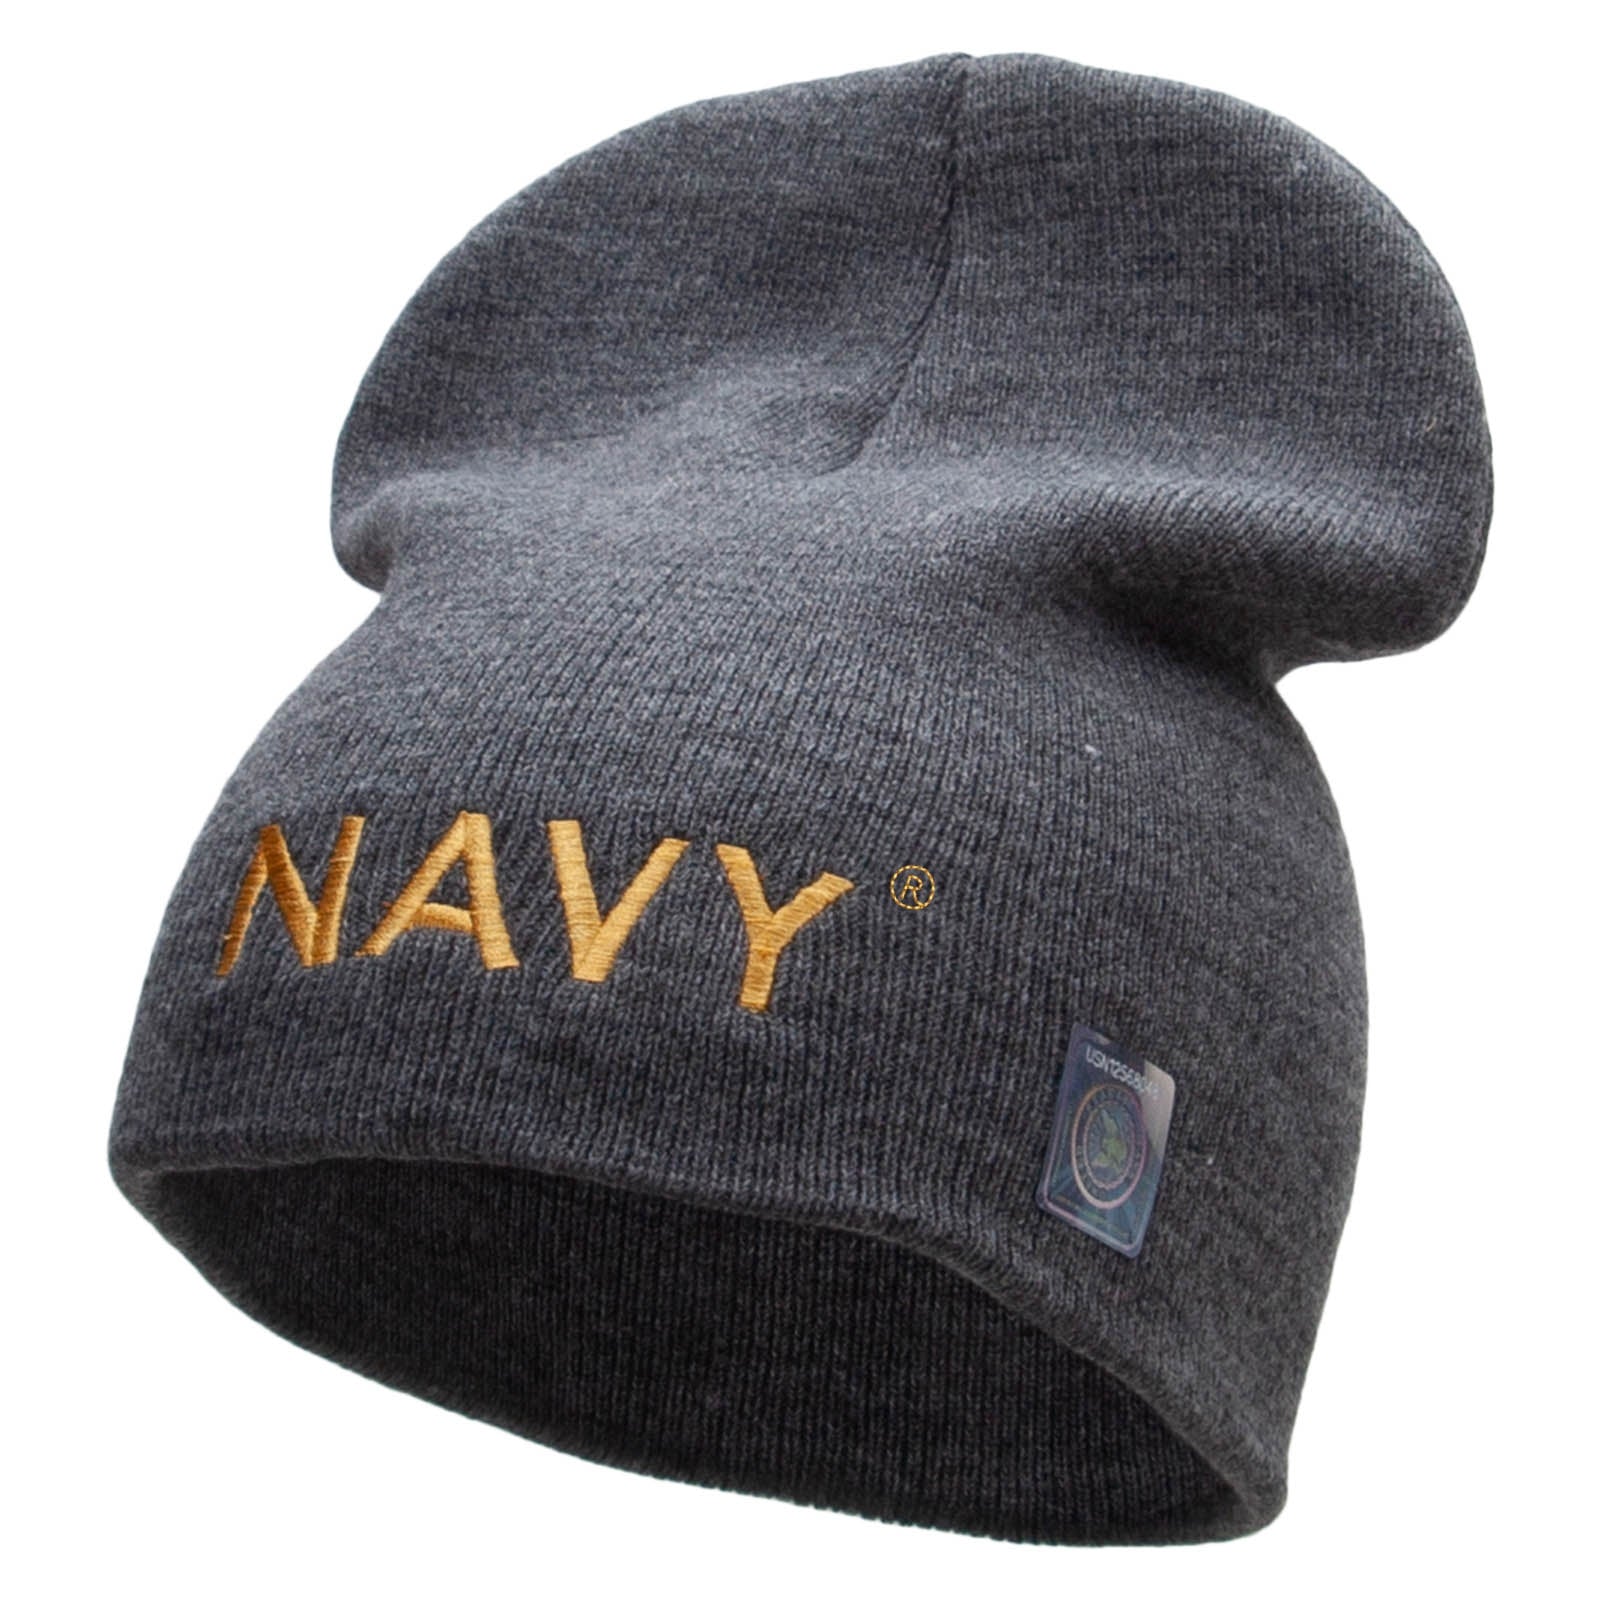 Licensed Navy Military Embroidered Short Beanie Made in USA - Grey OSFM